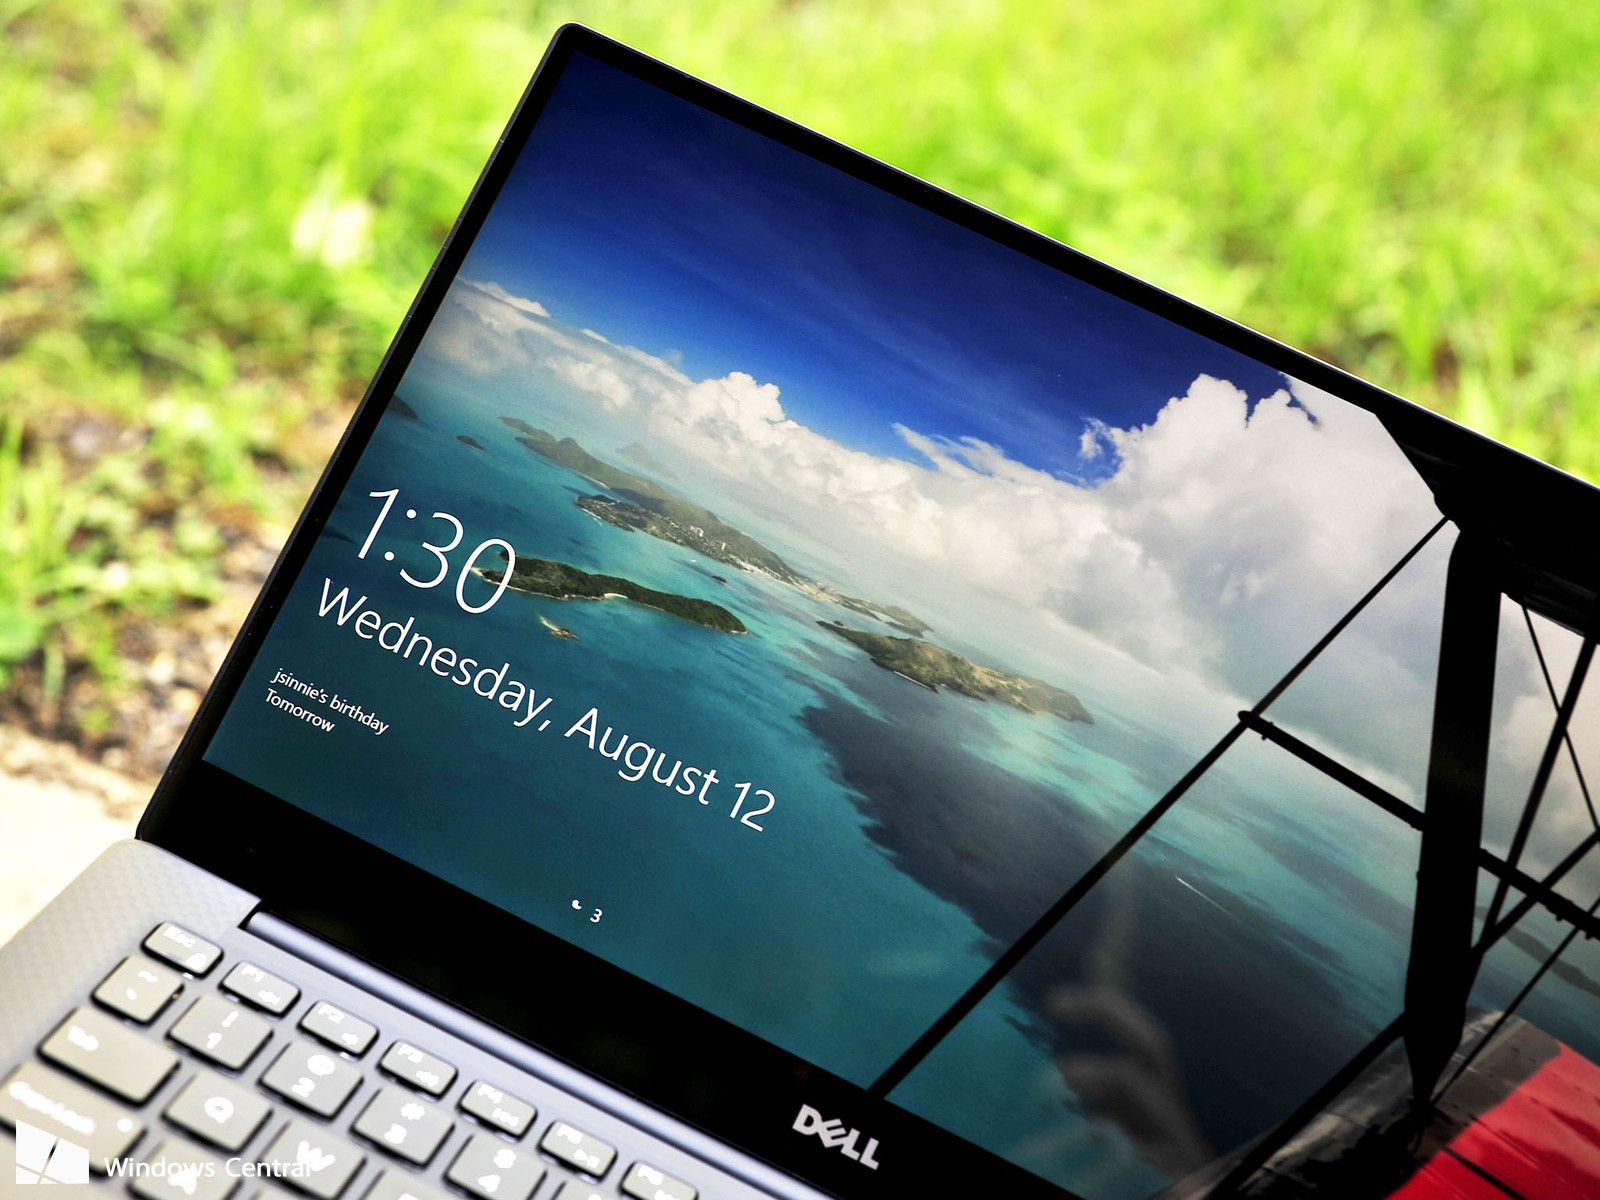 How To Save Windows Spotlight Lockscreen Image So You Can Use Them As